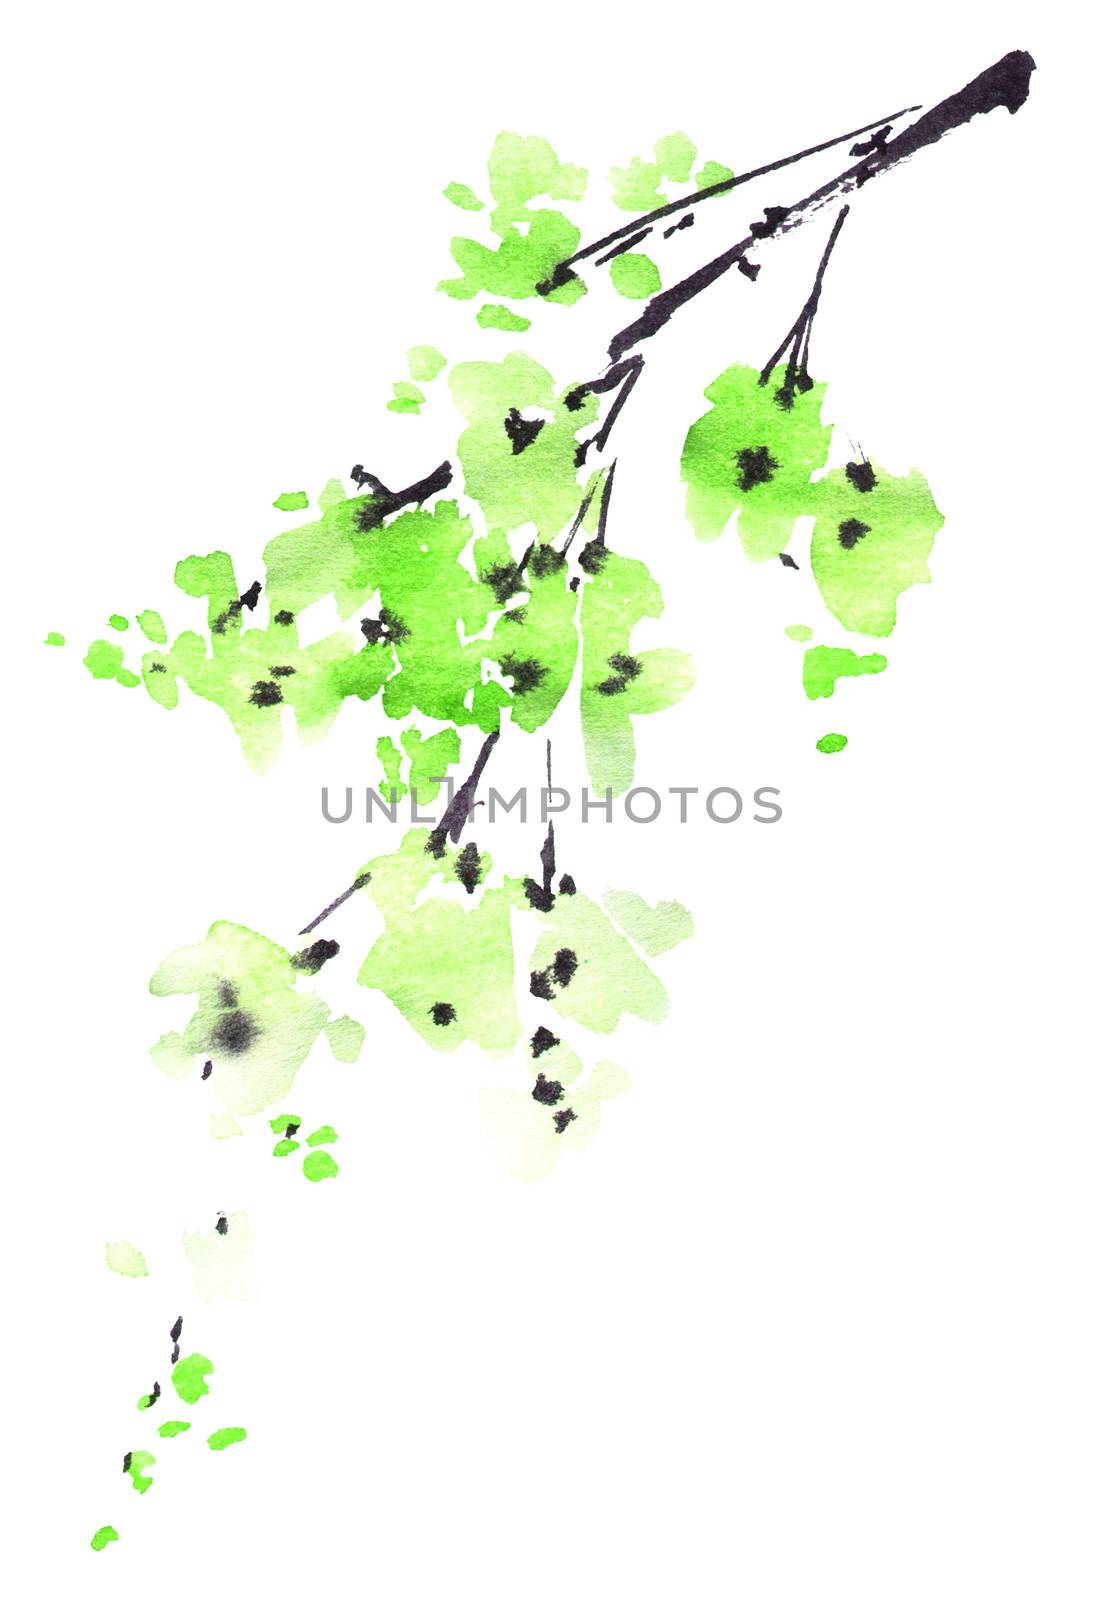 Watercolor and ink illustration of tree branch with green leaves on white background. Oriental traditional painting in style sumi-e, u-sin.